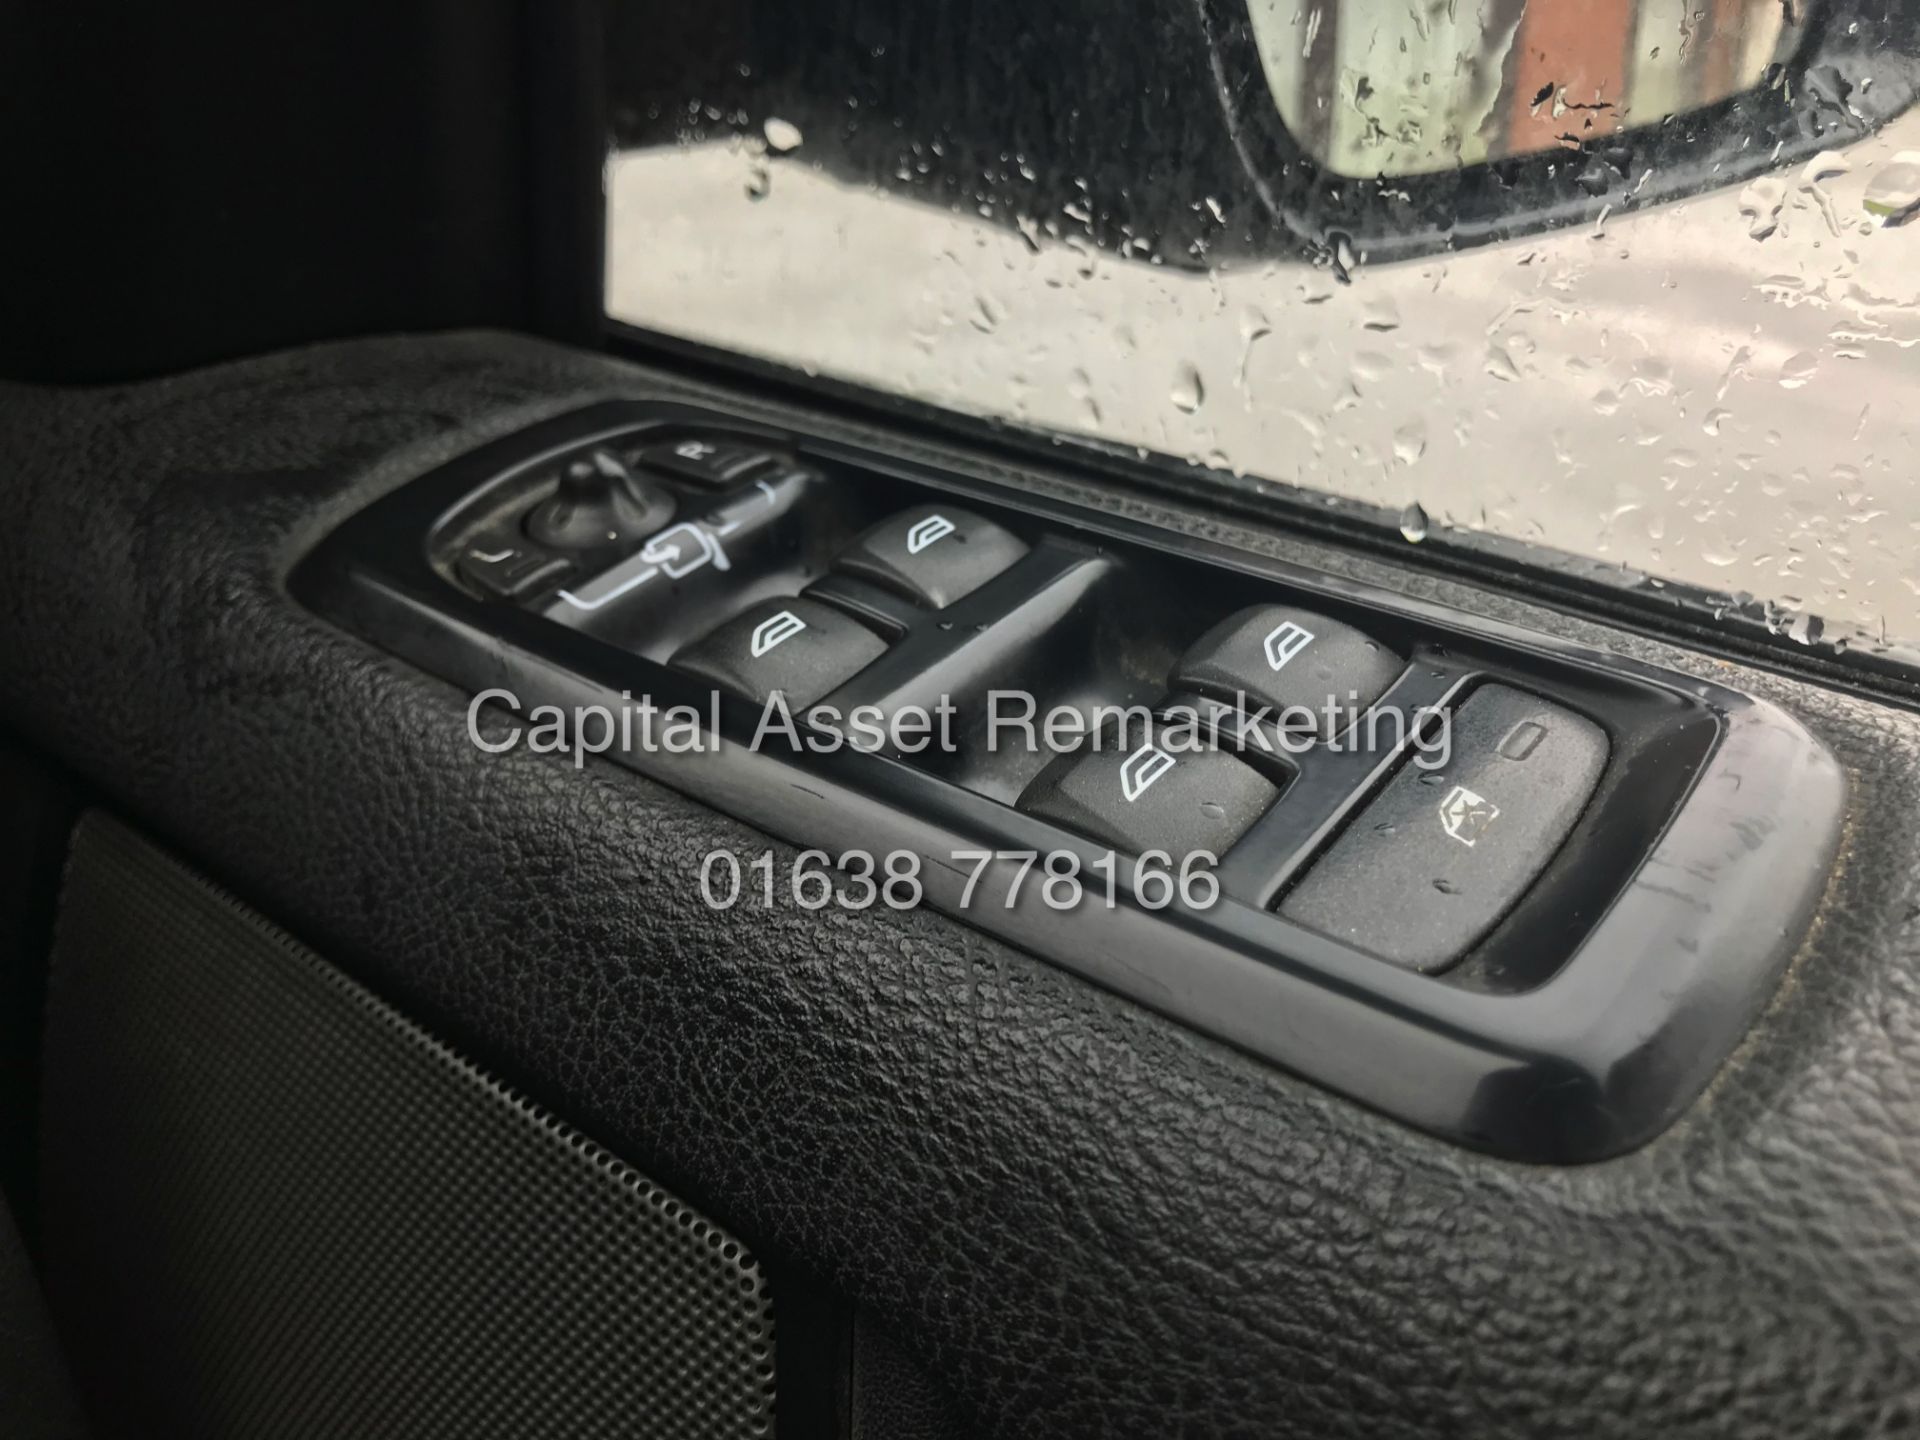 LANDROVER DISCOVERY 4 "SE" AUTO 3.0SDV6 - (2016 REG) 1 KEEPER - SAT NAV - LEATHER - HUGE SPEC -WOW! - Image 16 of 20